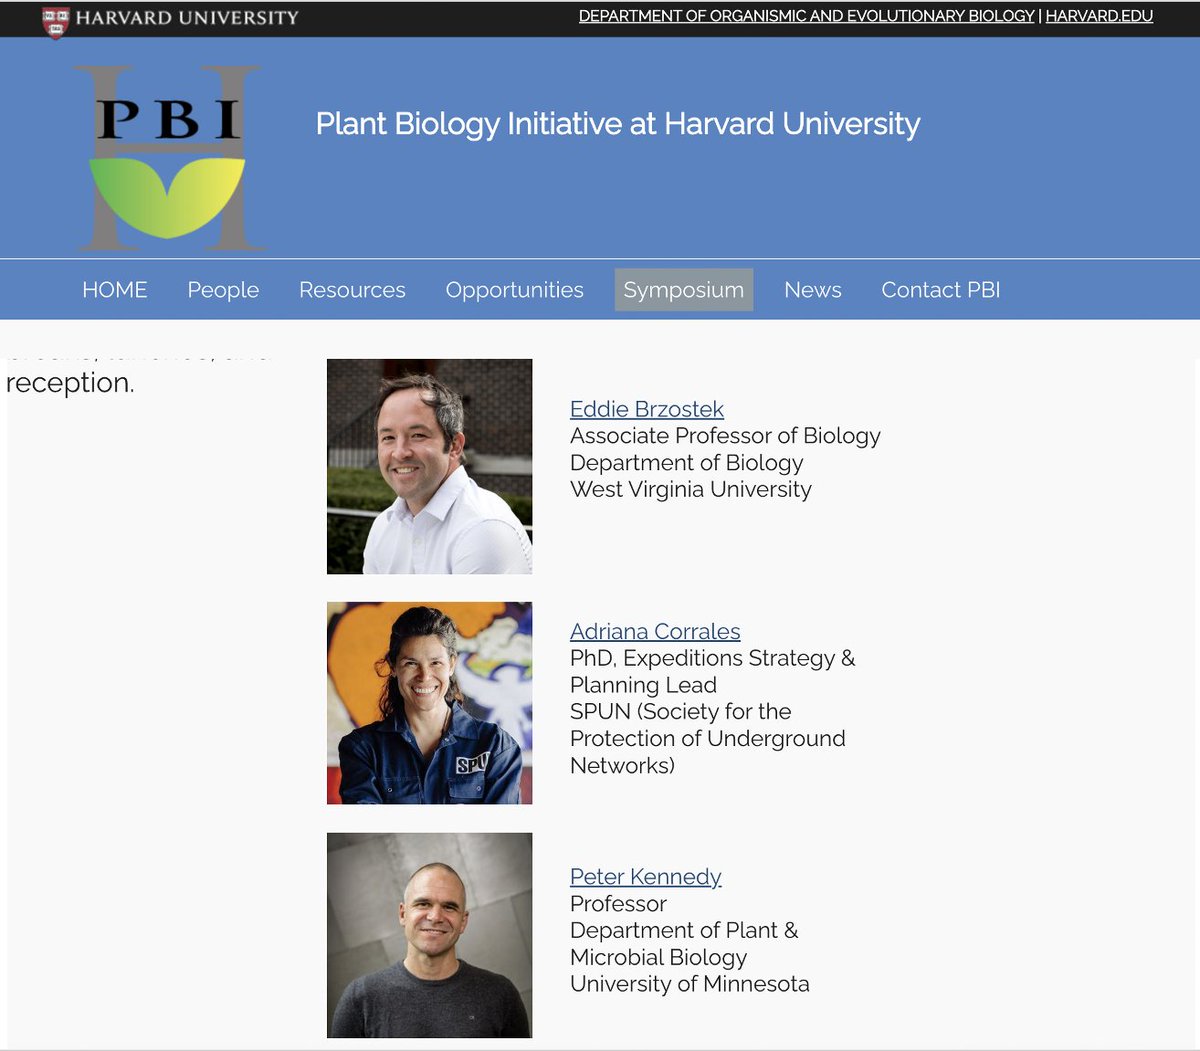 Our Expedition Lead @adri_corrales33 will be speaking today at the Plant Biology Initiative at @HarvardOEB at 11:40AM EST. If you can't attend, watch the video here: youtube.com/channel/UCpf6k…